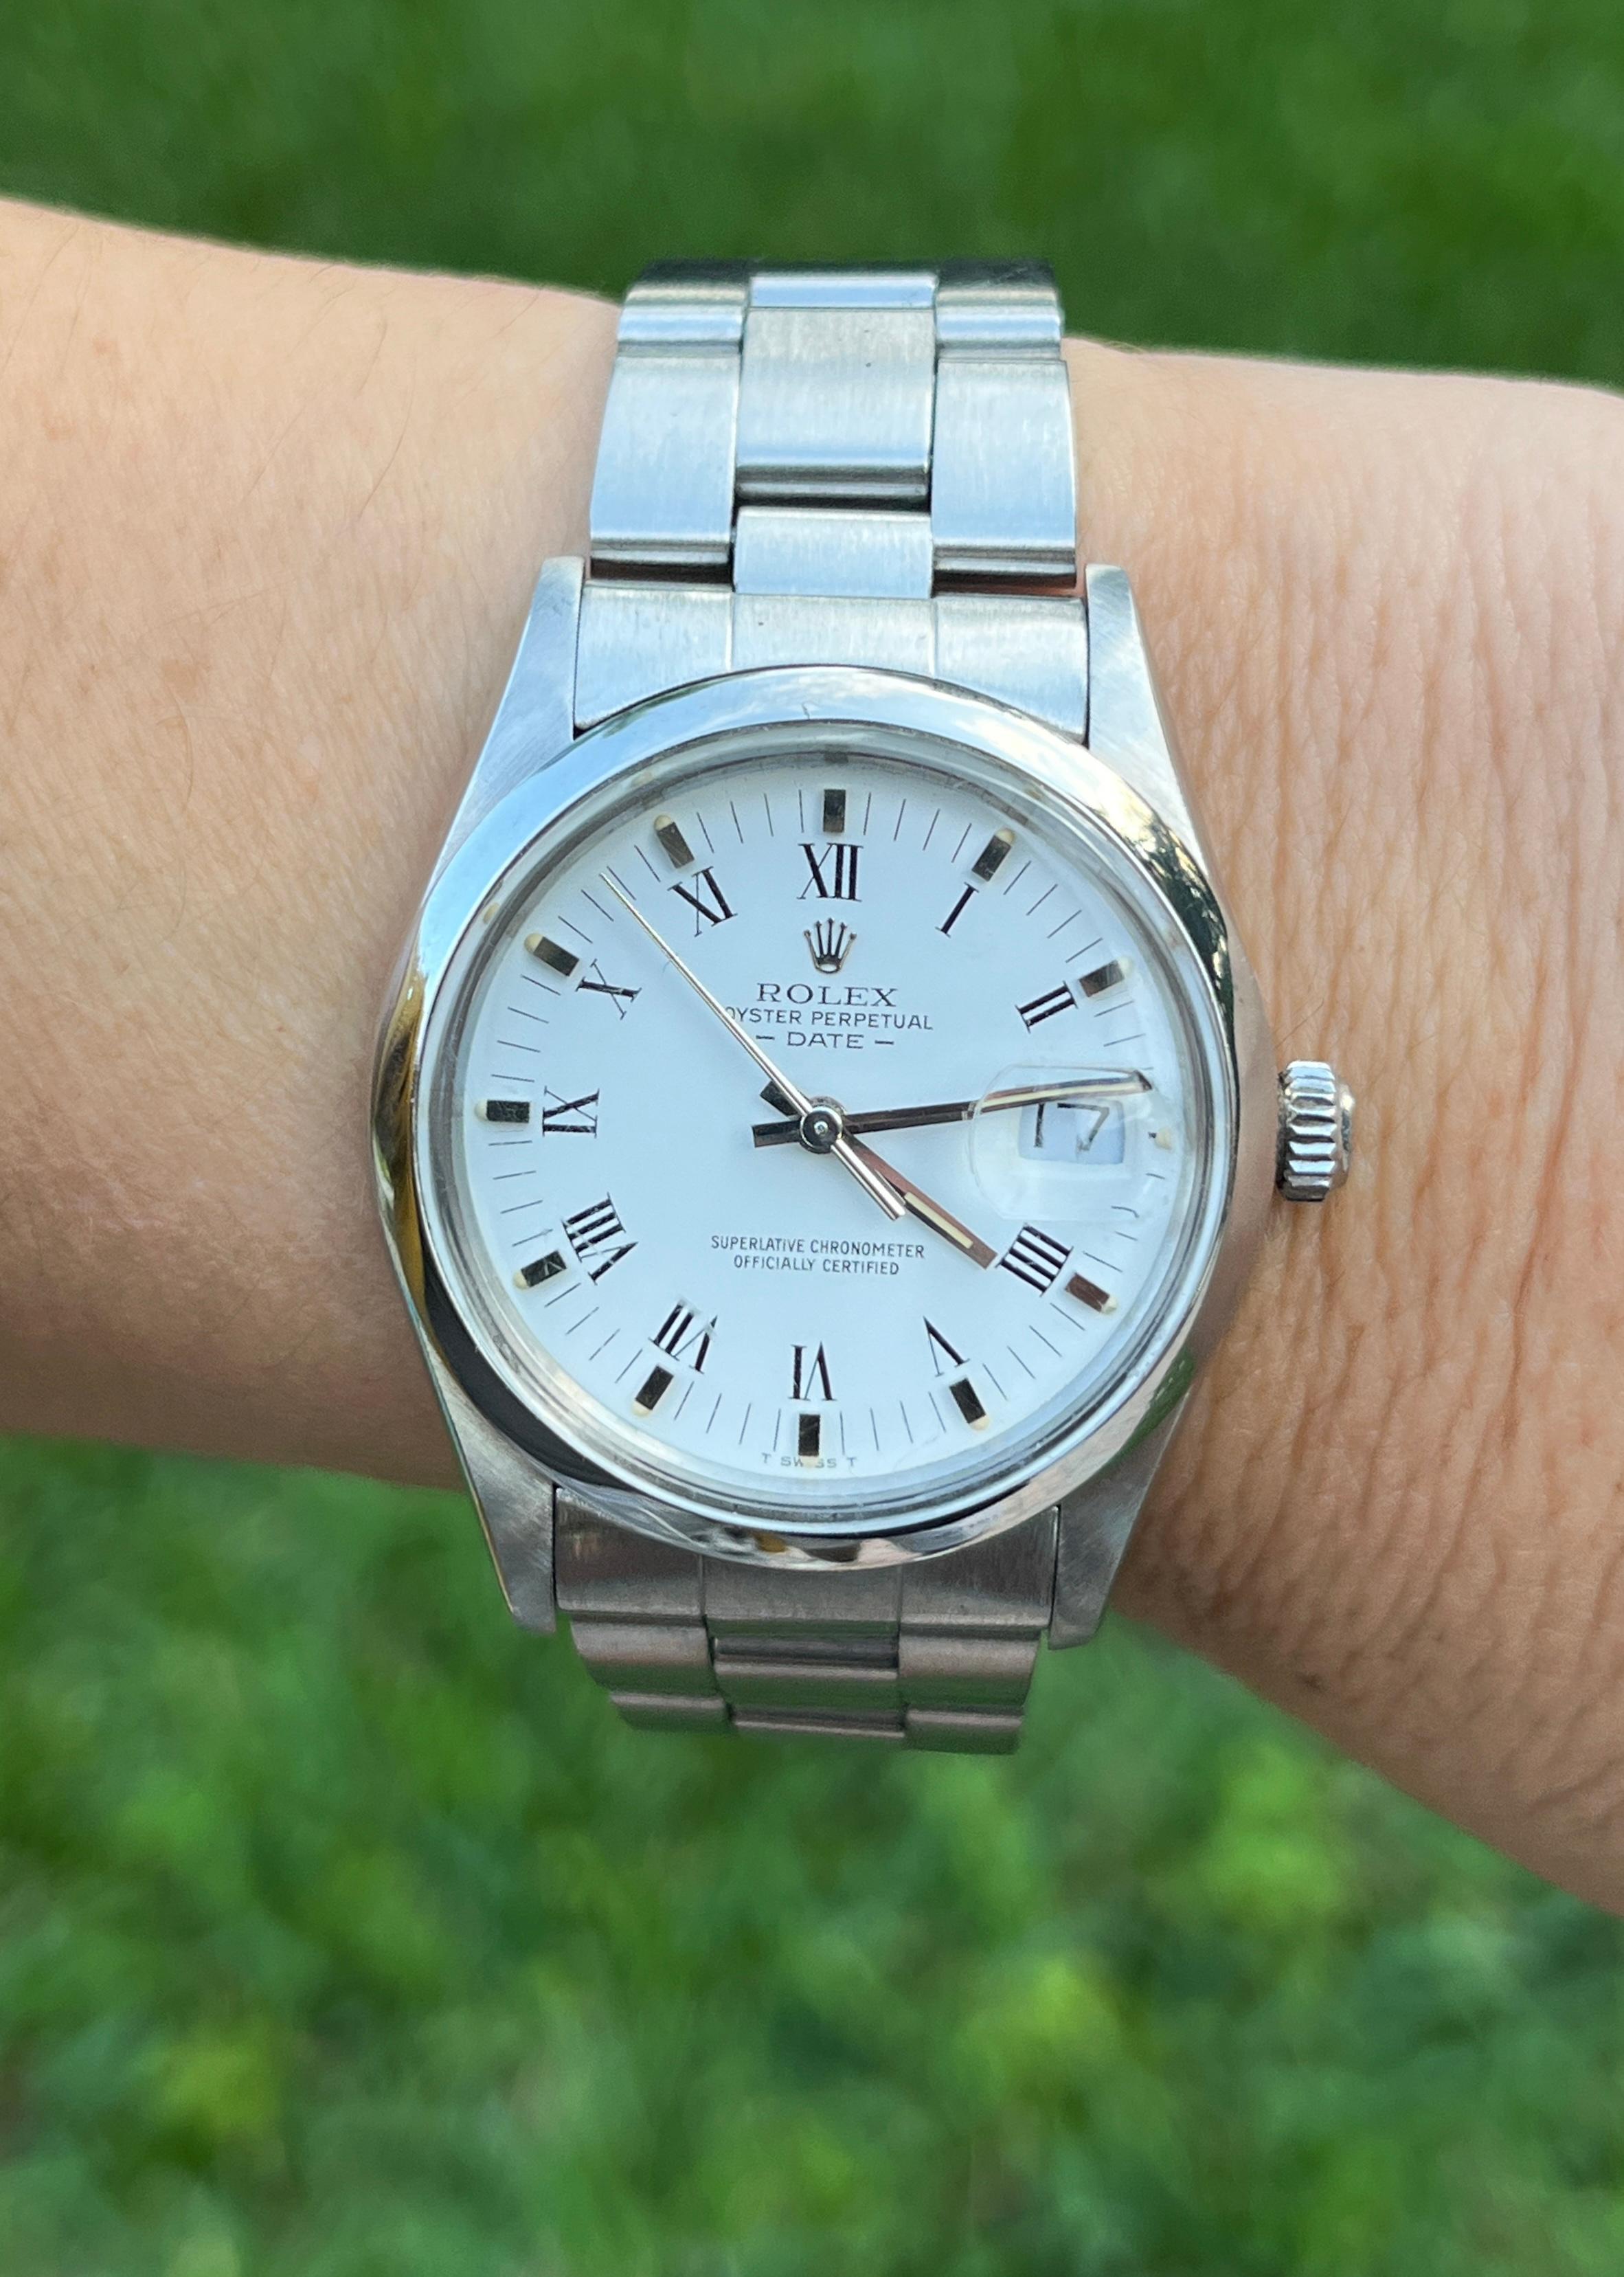 Rolex Oyster Perpetual Date wristwatch in stainless steel. Features an Oyster bracelet, fold-over clasp (deployment release), quickset, and sapphire crystal. Screw-down crown, and 27 jewels with date bubble. Crisp white dial with silver and Roman